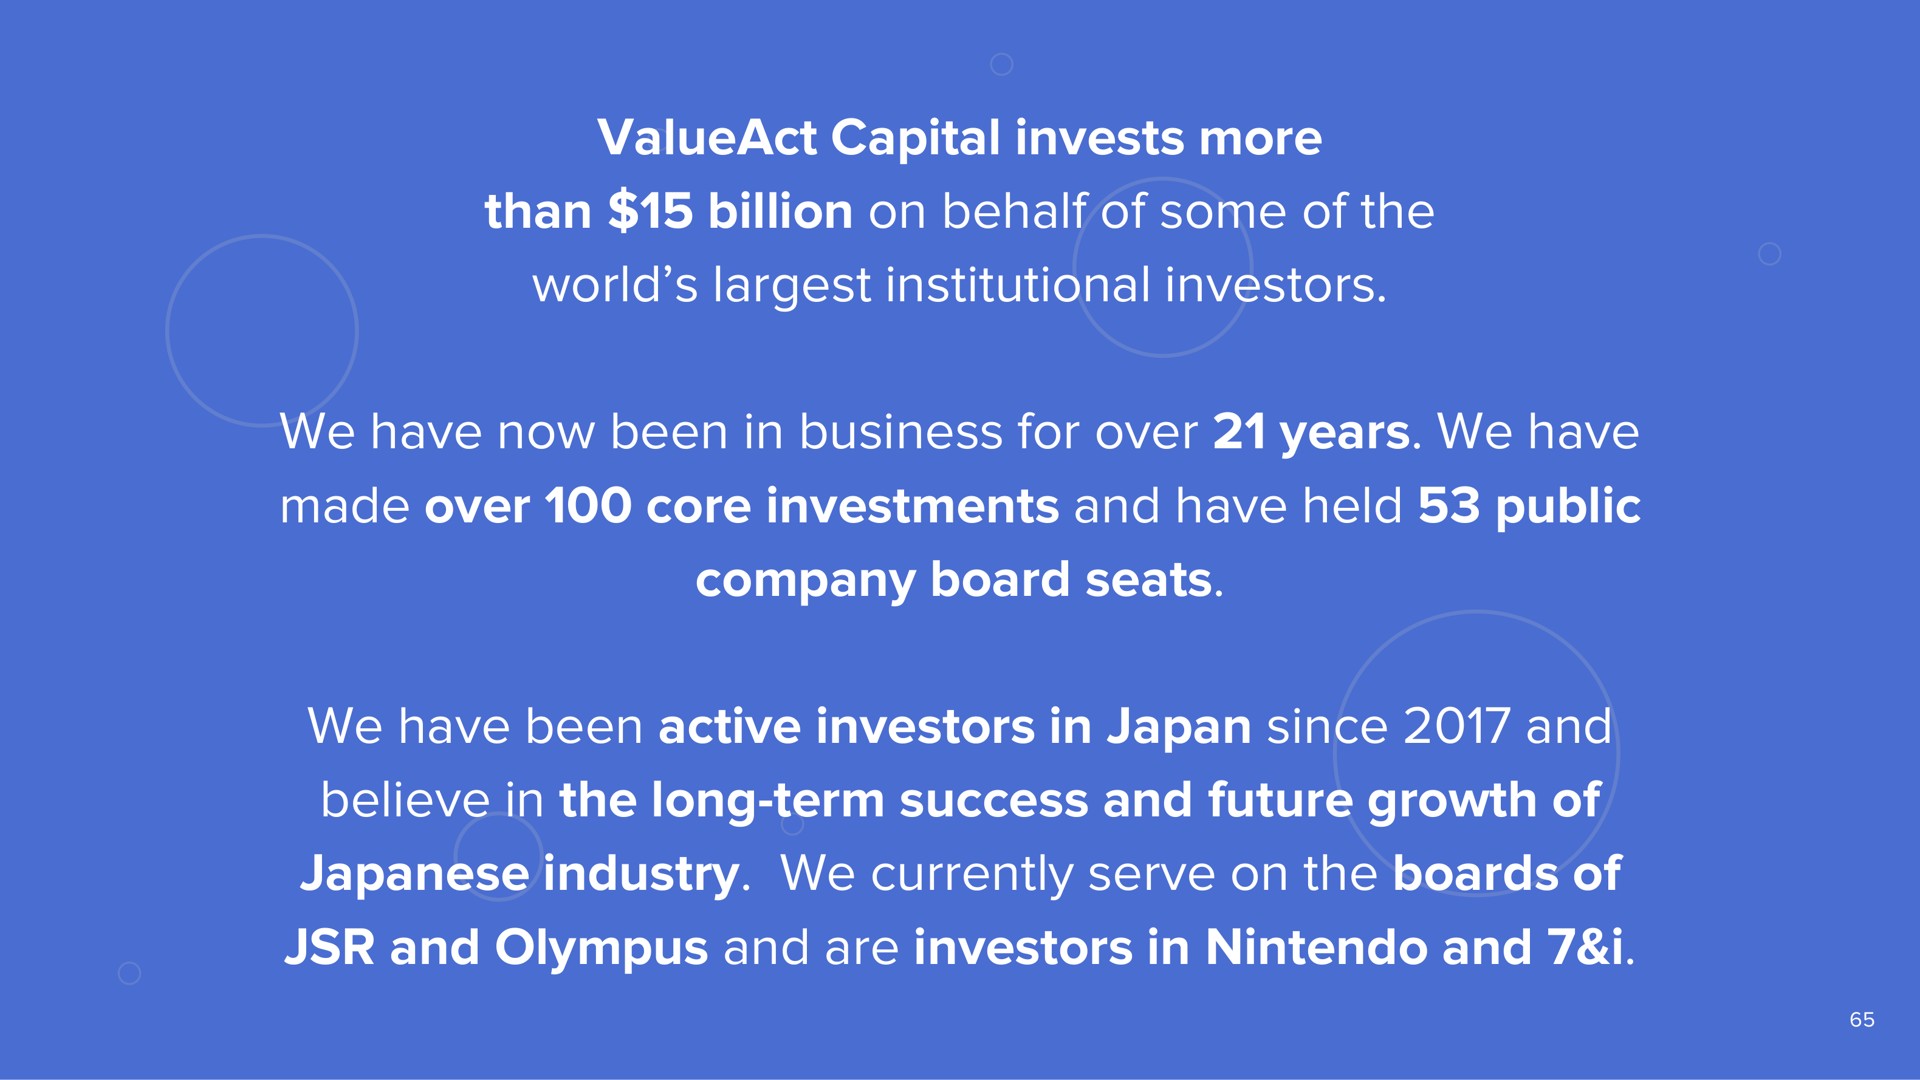 capital invests more than billion on behalf of some of the world institutional investors we have now been in business for over years we have made over core investments and have held public company board seats we have been active investors in japan since and believe in the long term success and future growth of industry we currently serve on the boards of and and are investors in and i | ValueAct Capital